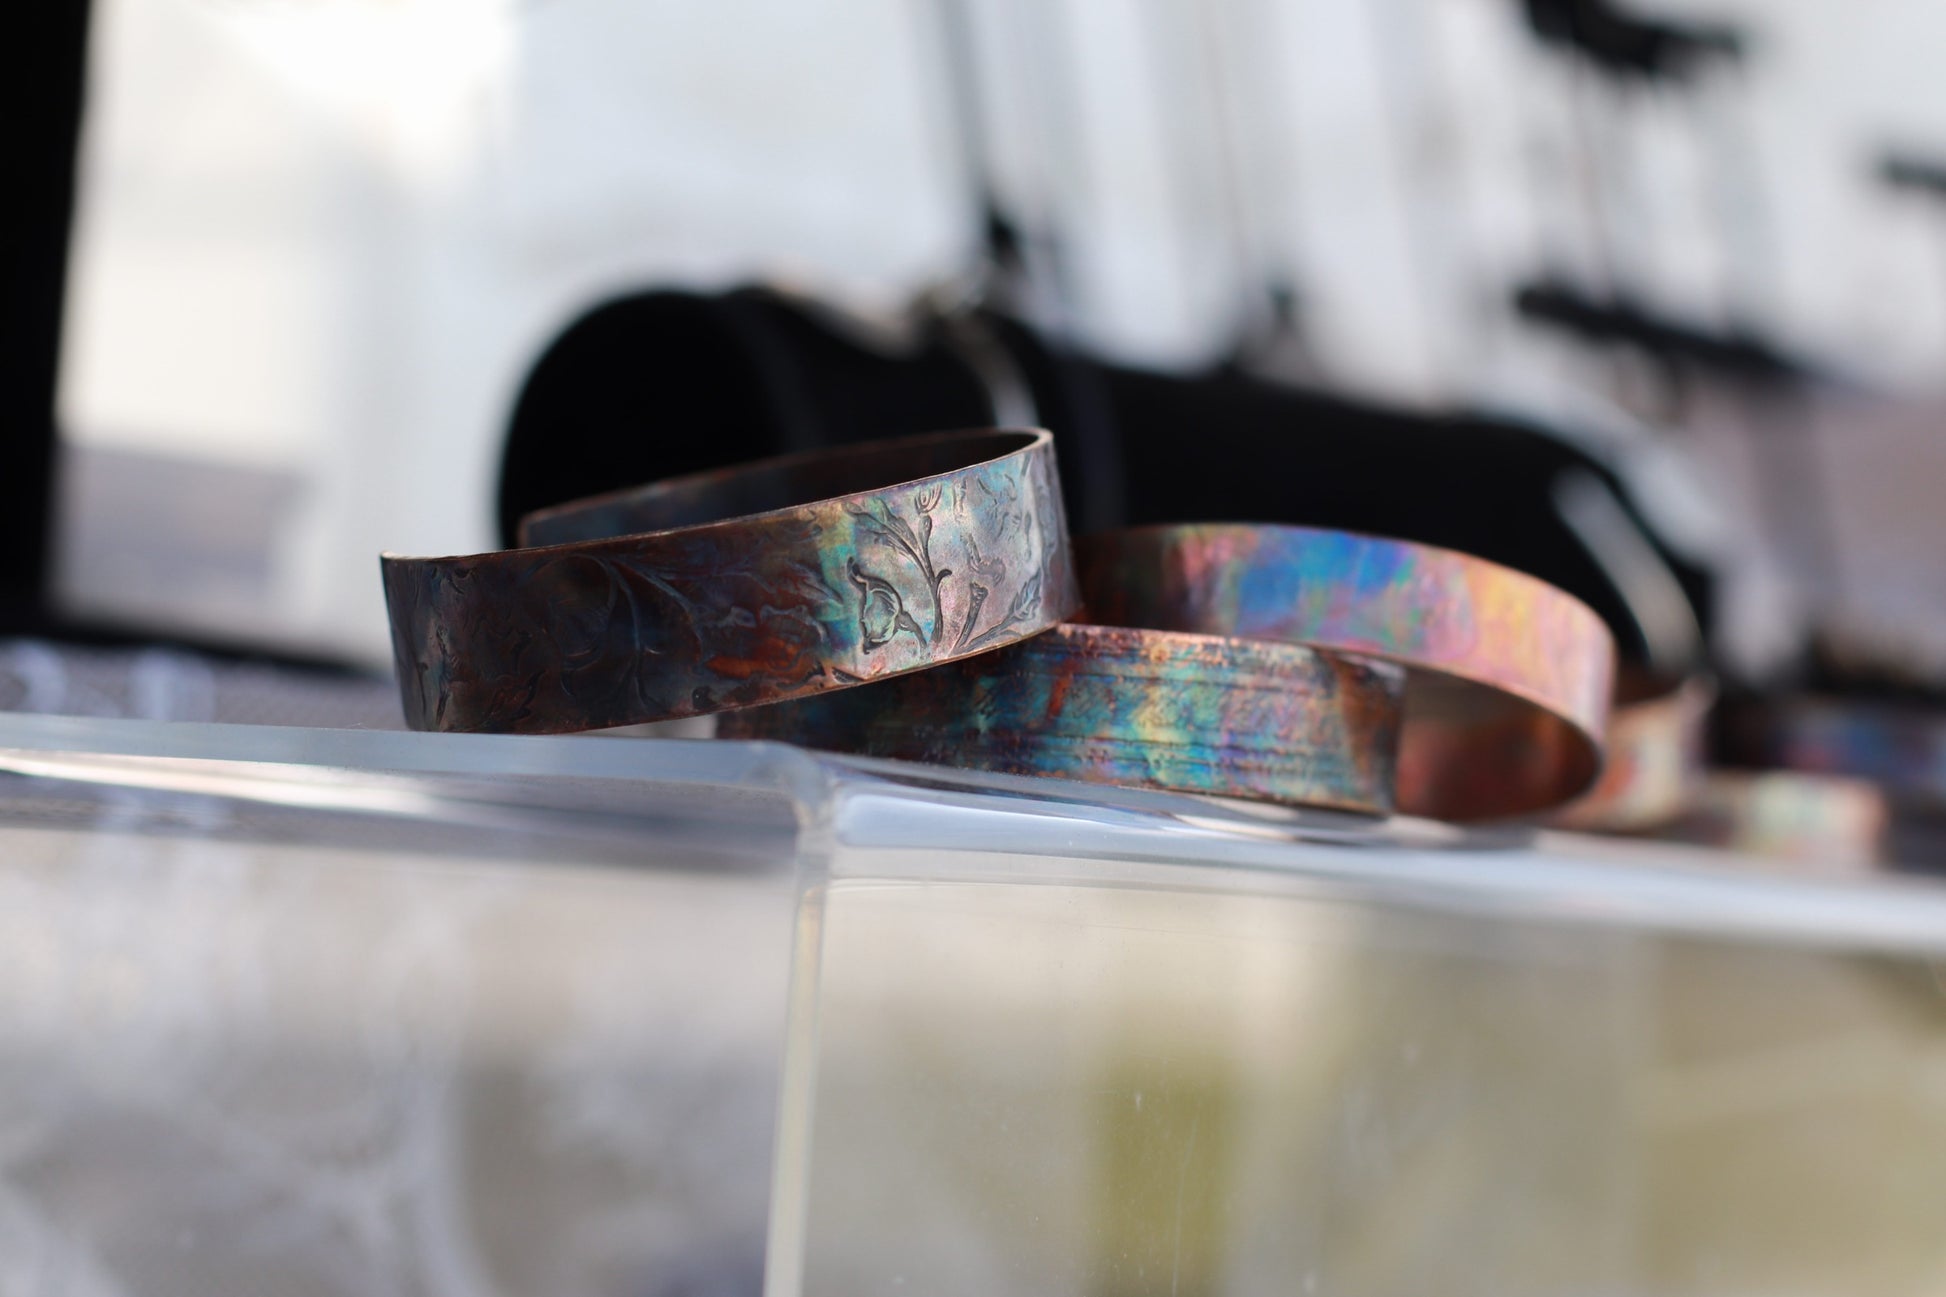 flame painted copper cuff bracelets